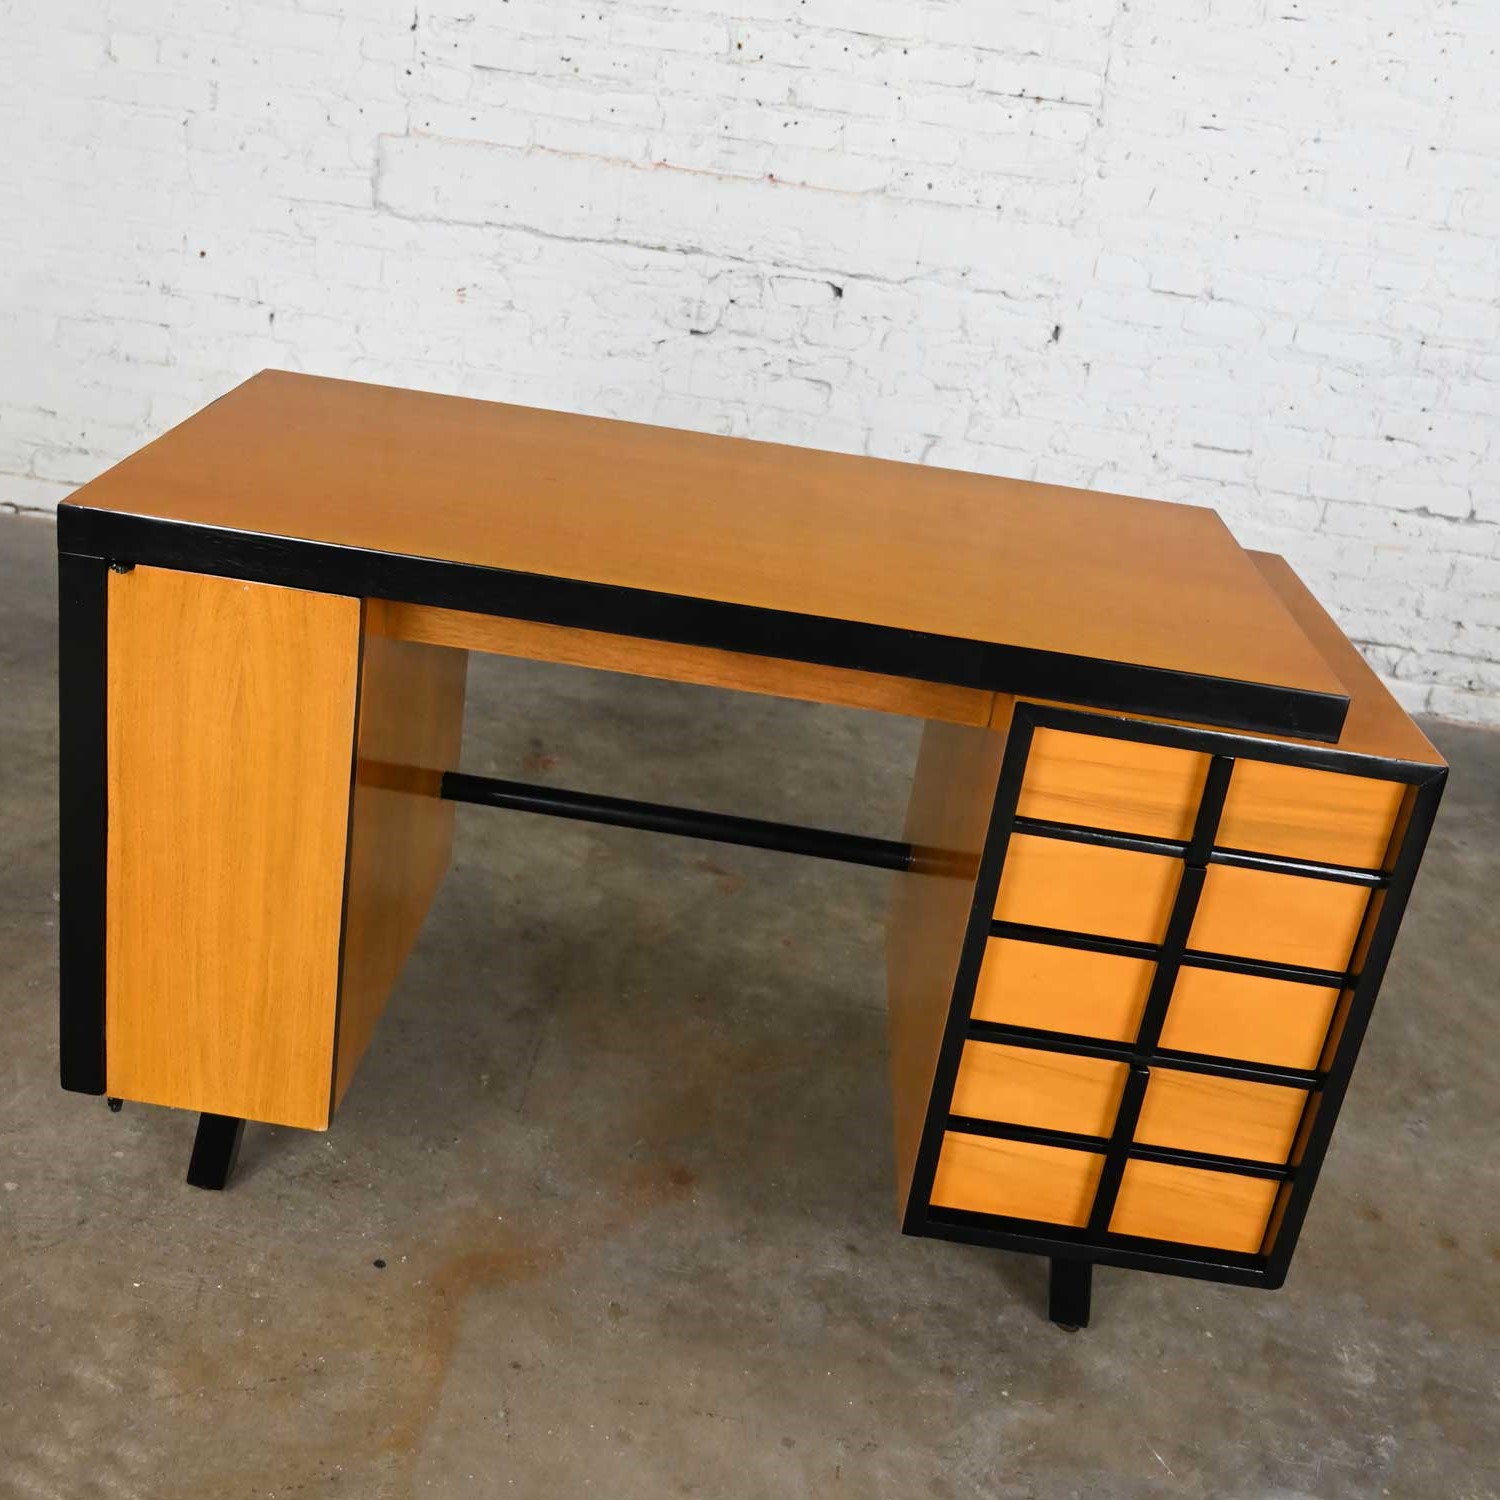 Vintage Mid Century Modern Art Deco Maple Colored Desk with Black Accents by American of Martinsville